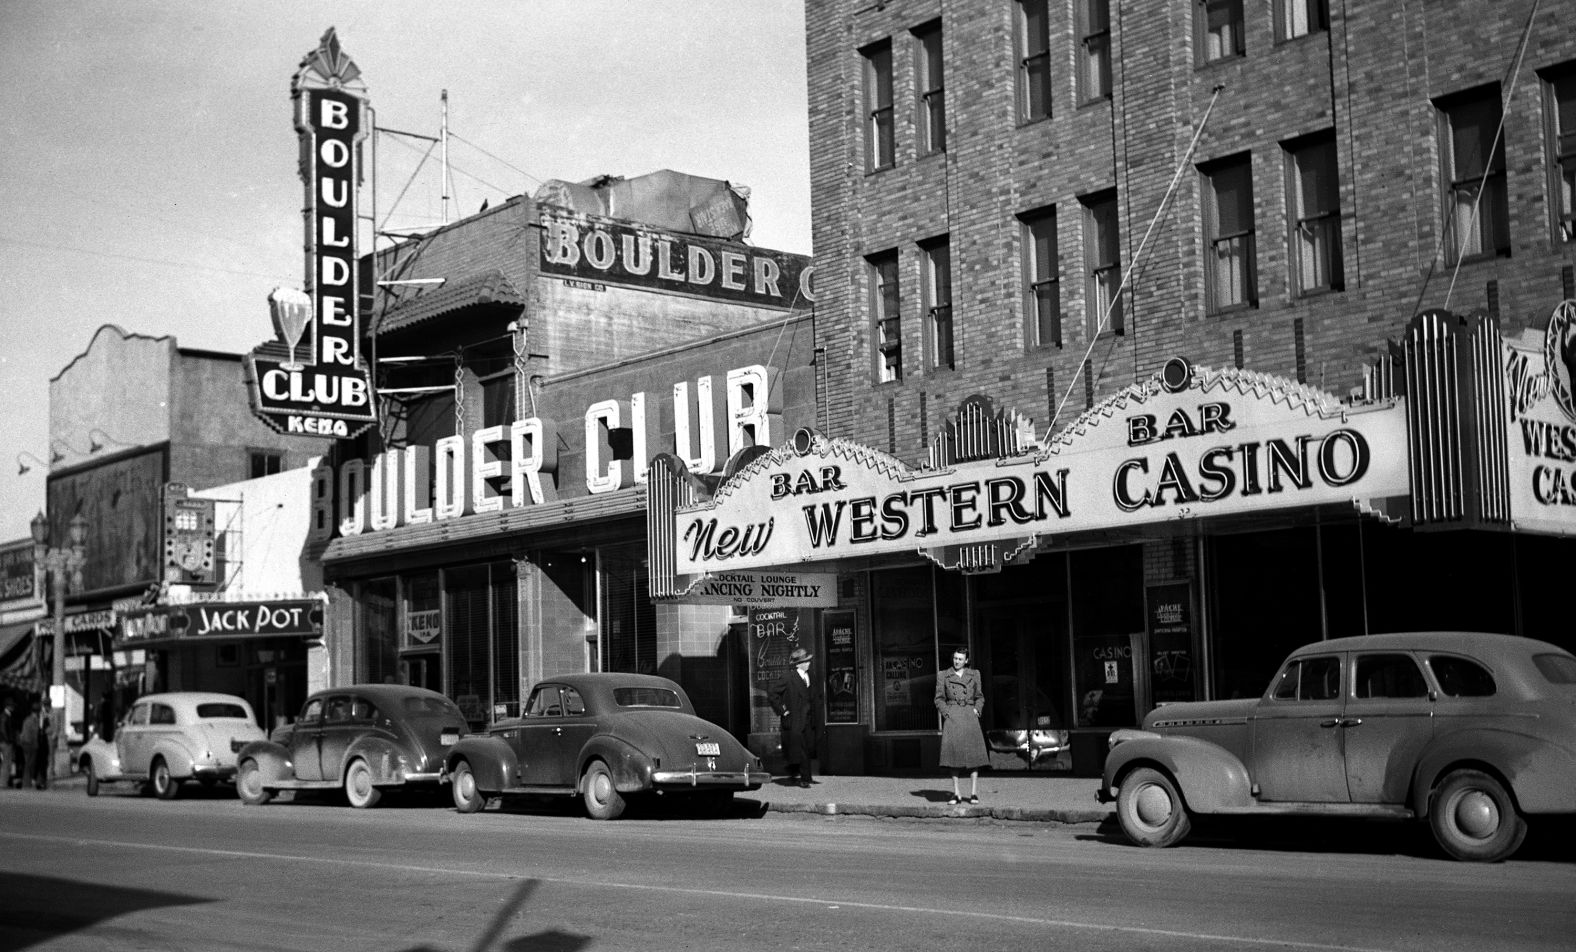 A woman stands in front of the New Western Casino and Boulder Club circa 1940. The Boulder Club was built in 1929 and received one of Las Vegas' first gambling permits. It closed in 1960.